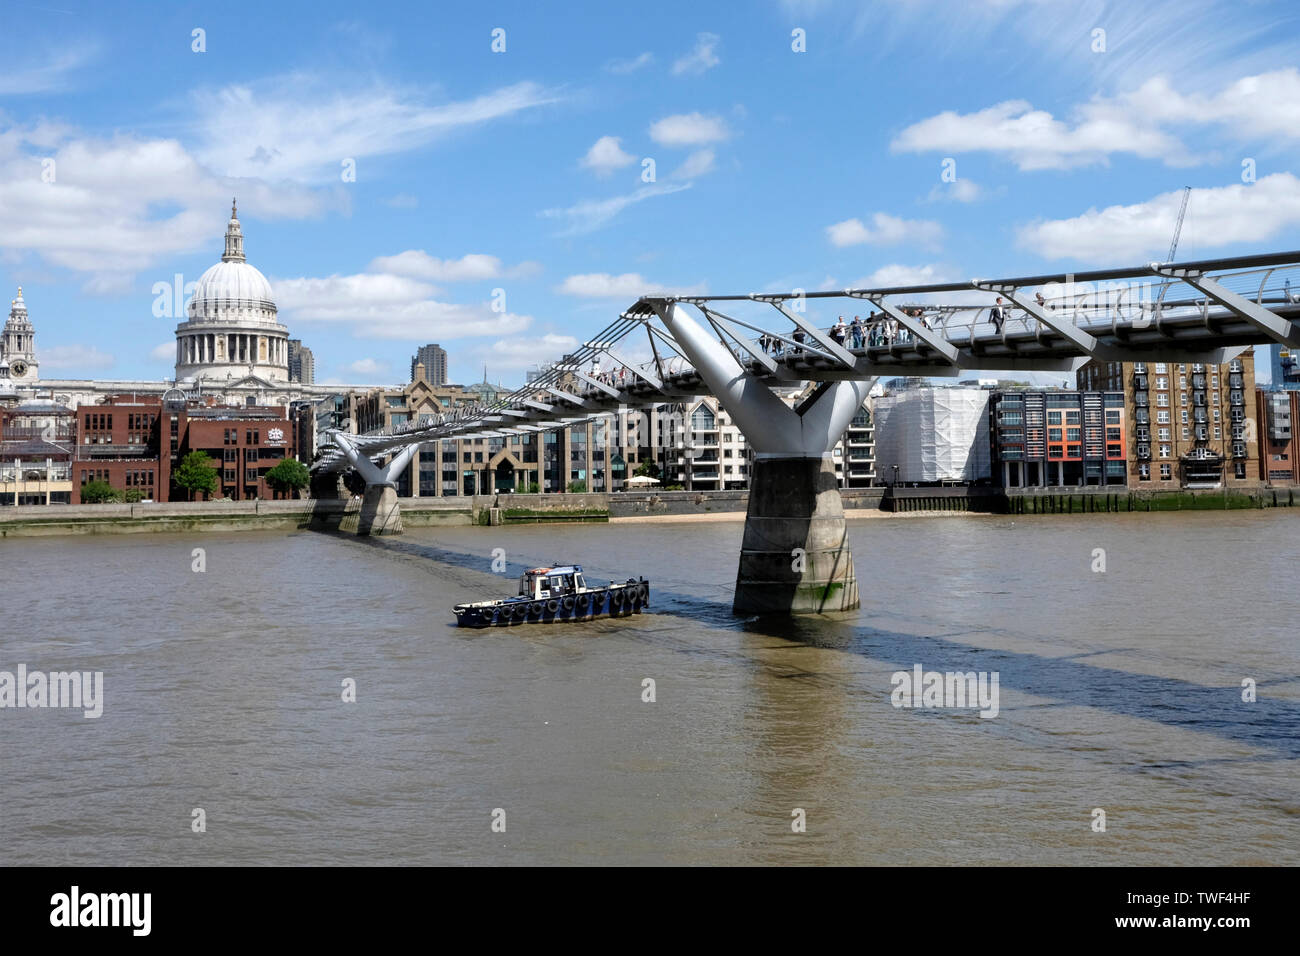 A general view of The Millennium bridge and St Paul’s cathedral. Stock Photo